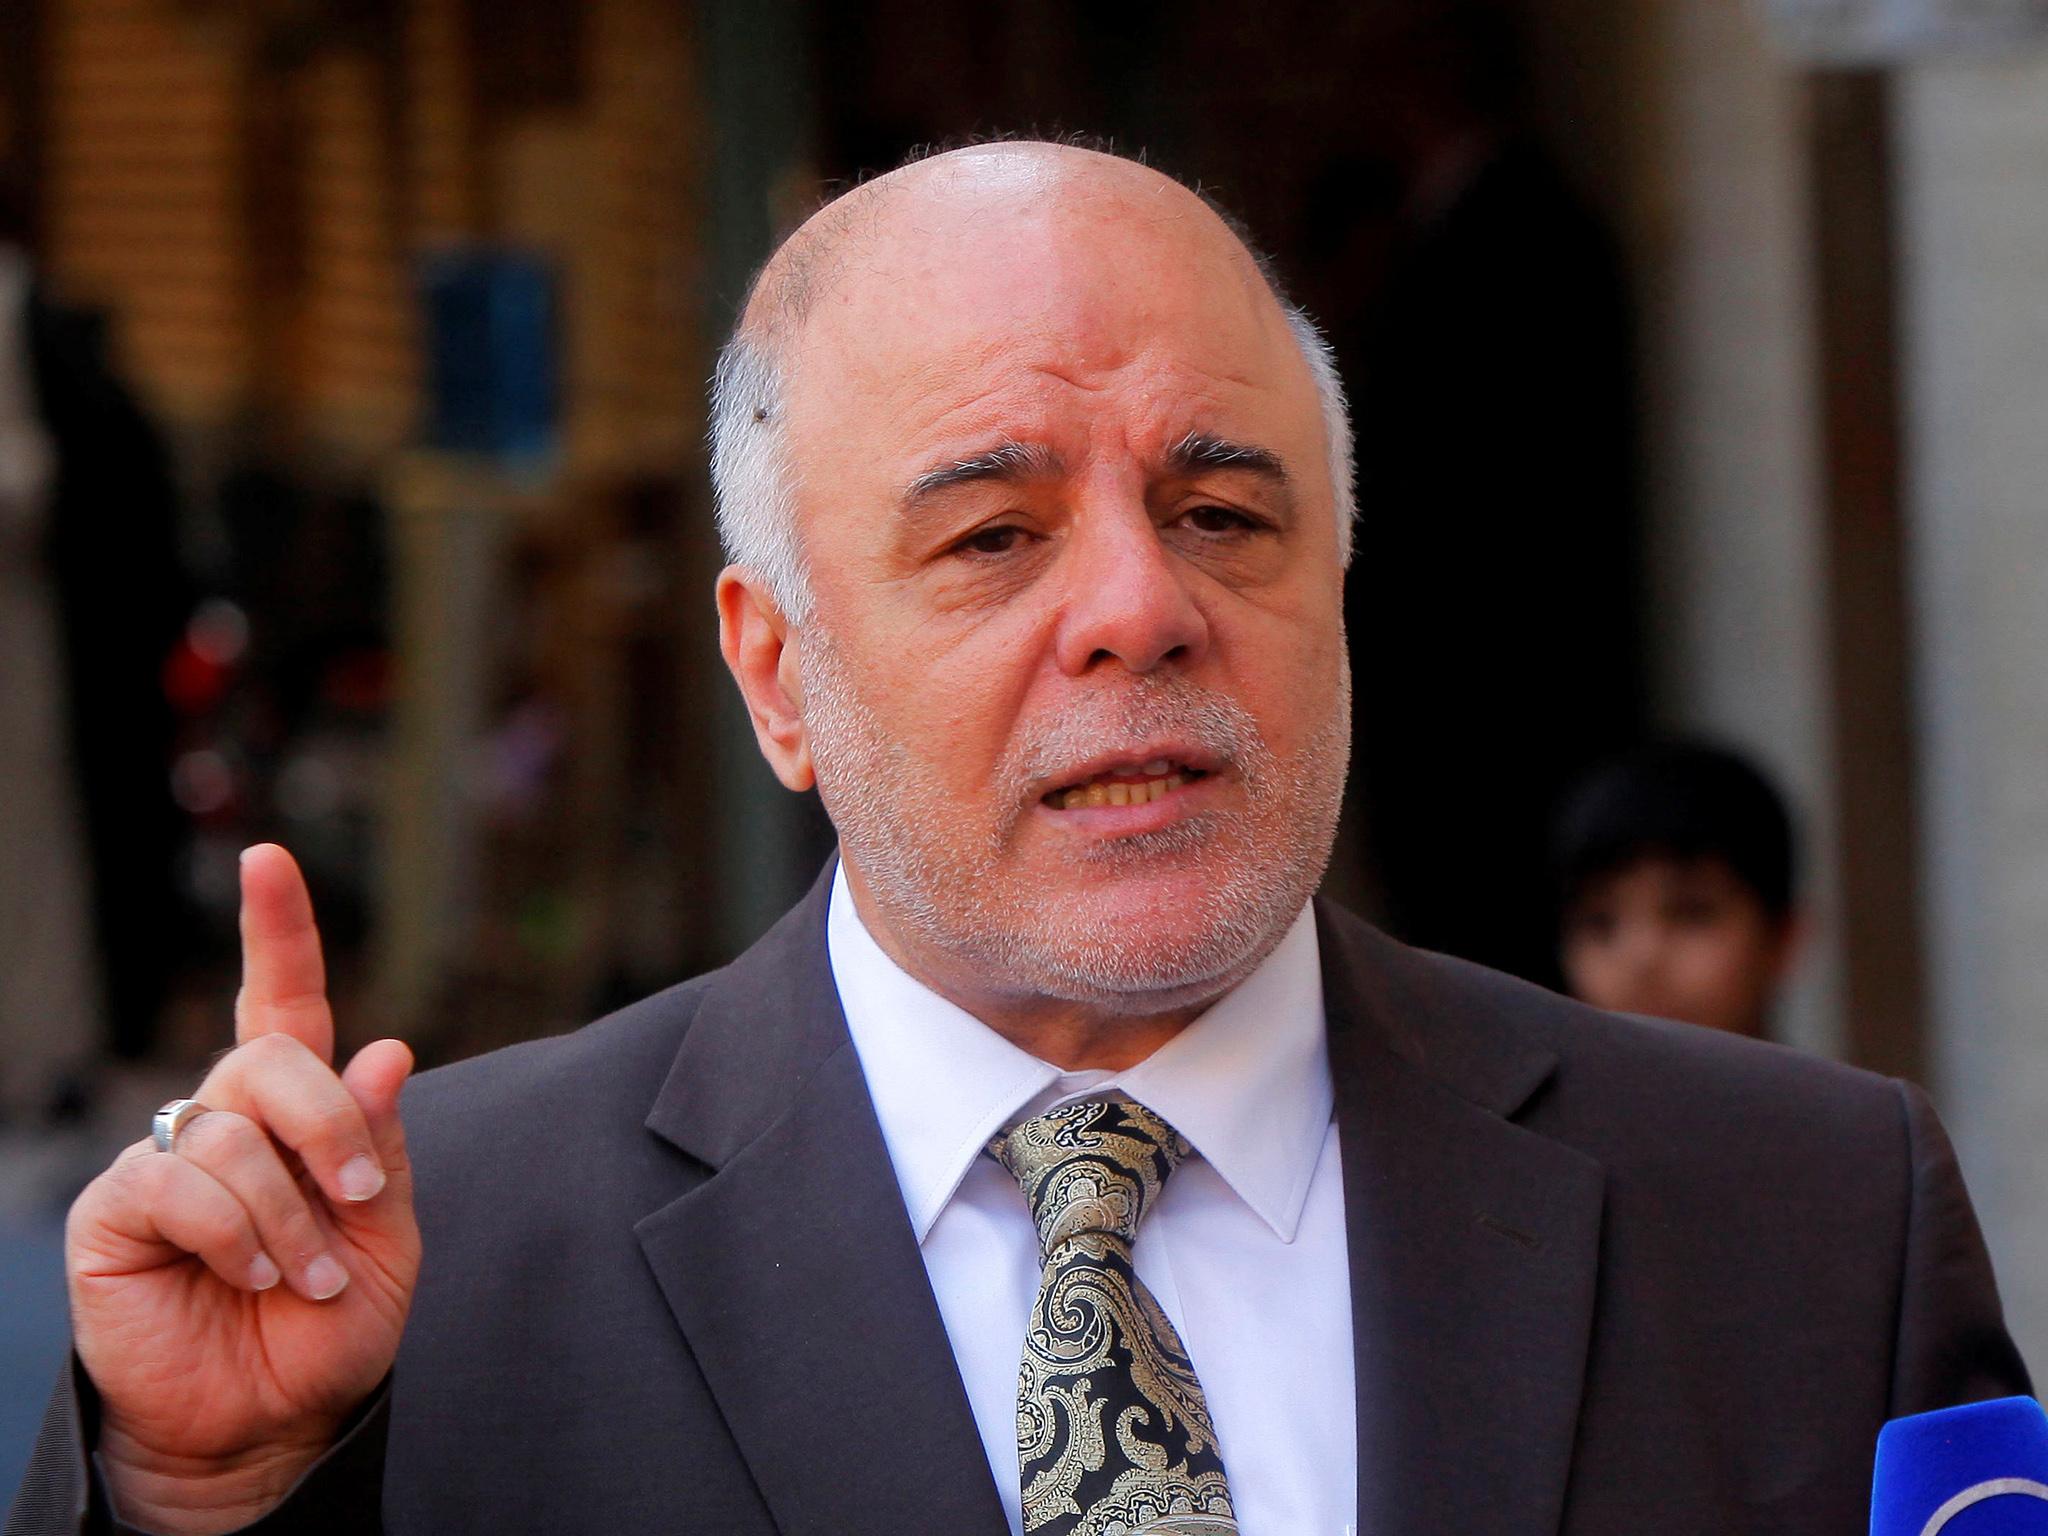 Iraqi Prime Minister Haider al-Abadi told reporters that despite a vote in Baghdad's parliament the country would not issue "retaliatory measures" for American travellers